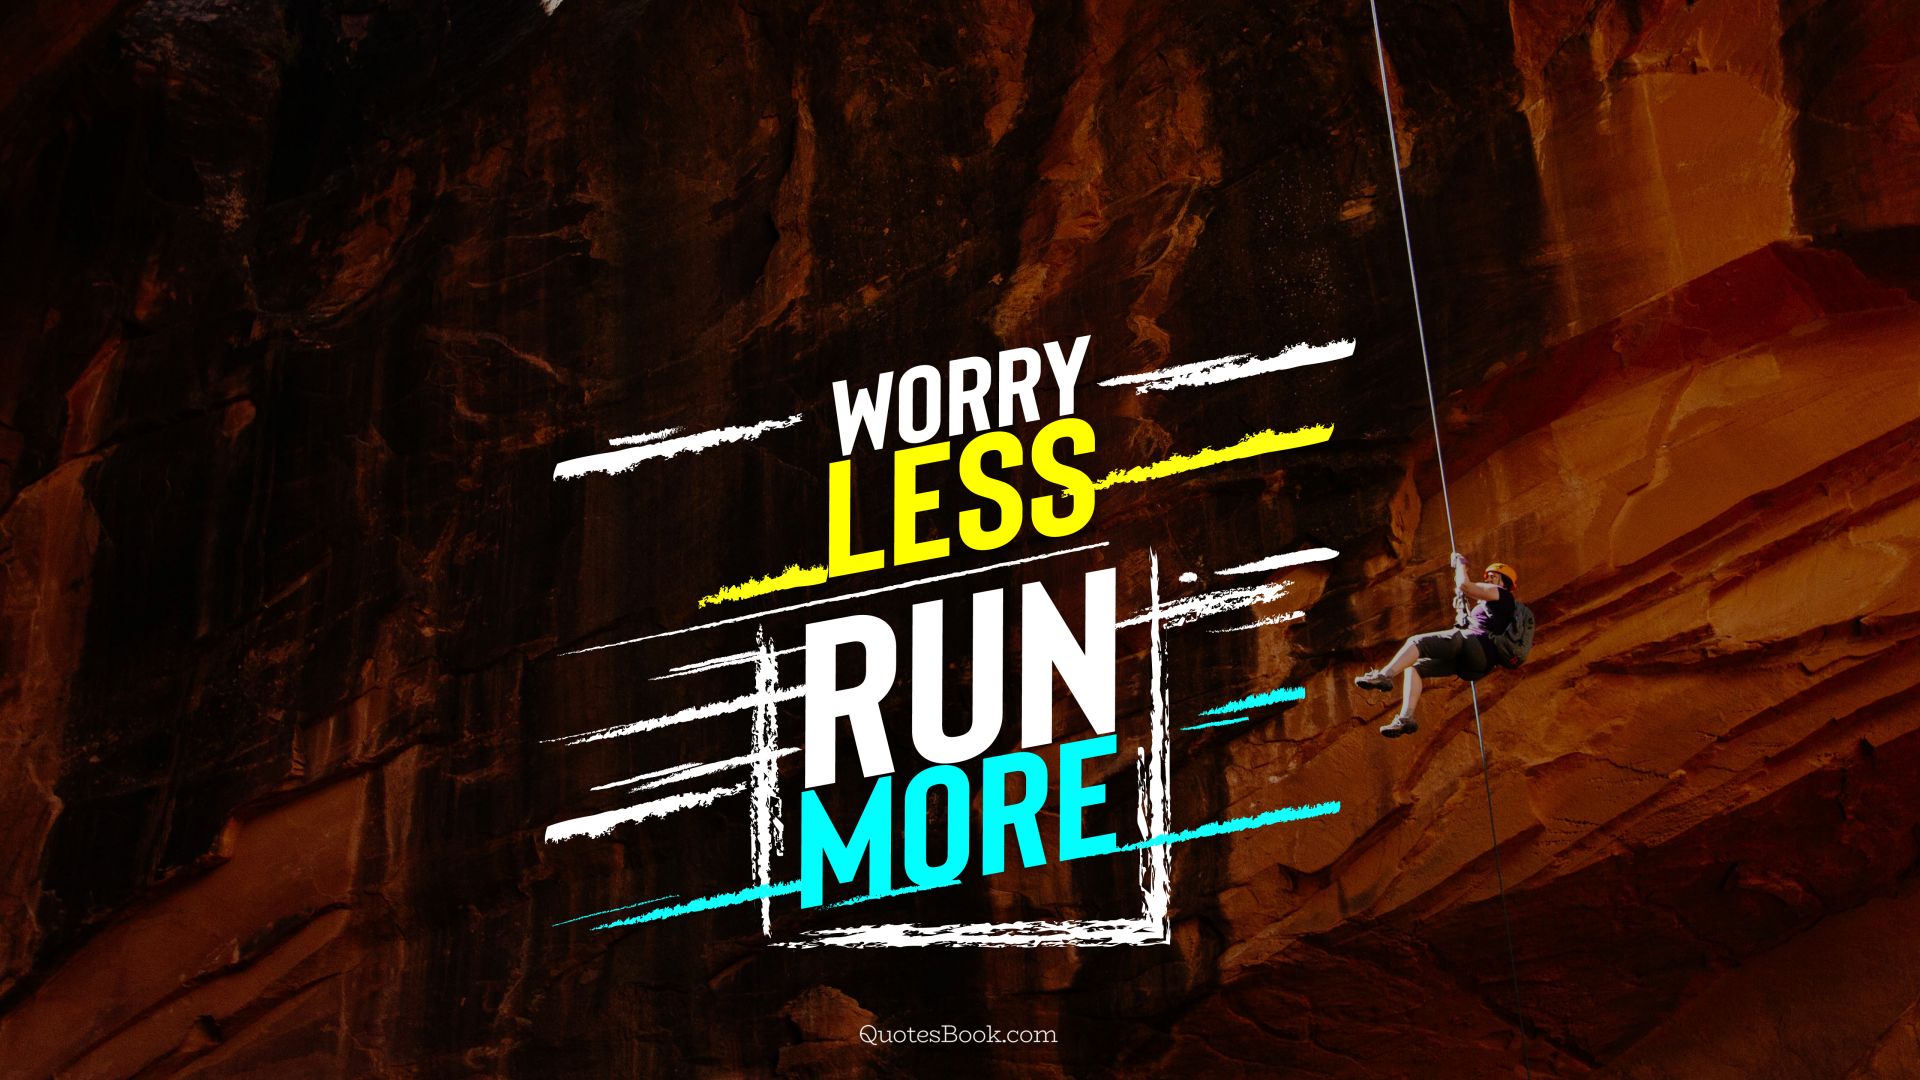 Worry less run more